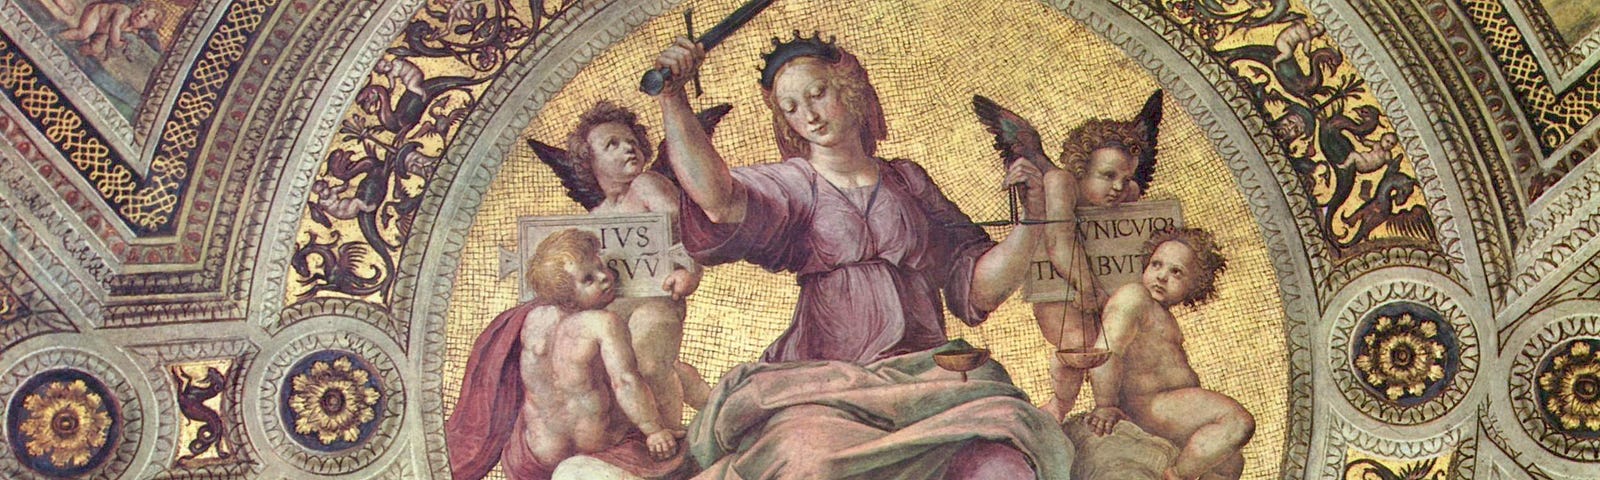 a fresco on a ceiling of an image of justice personified holding a sword surrounded by cherubs looking on. the image is surrounded by gold leaf details